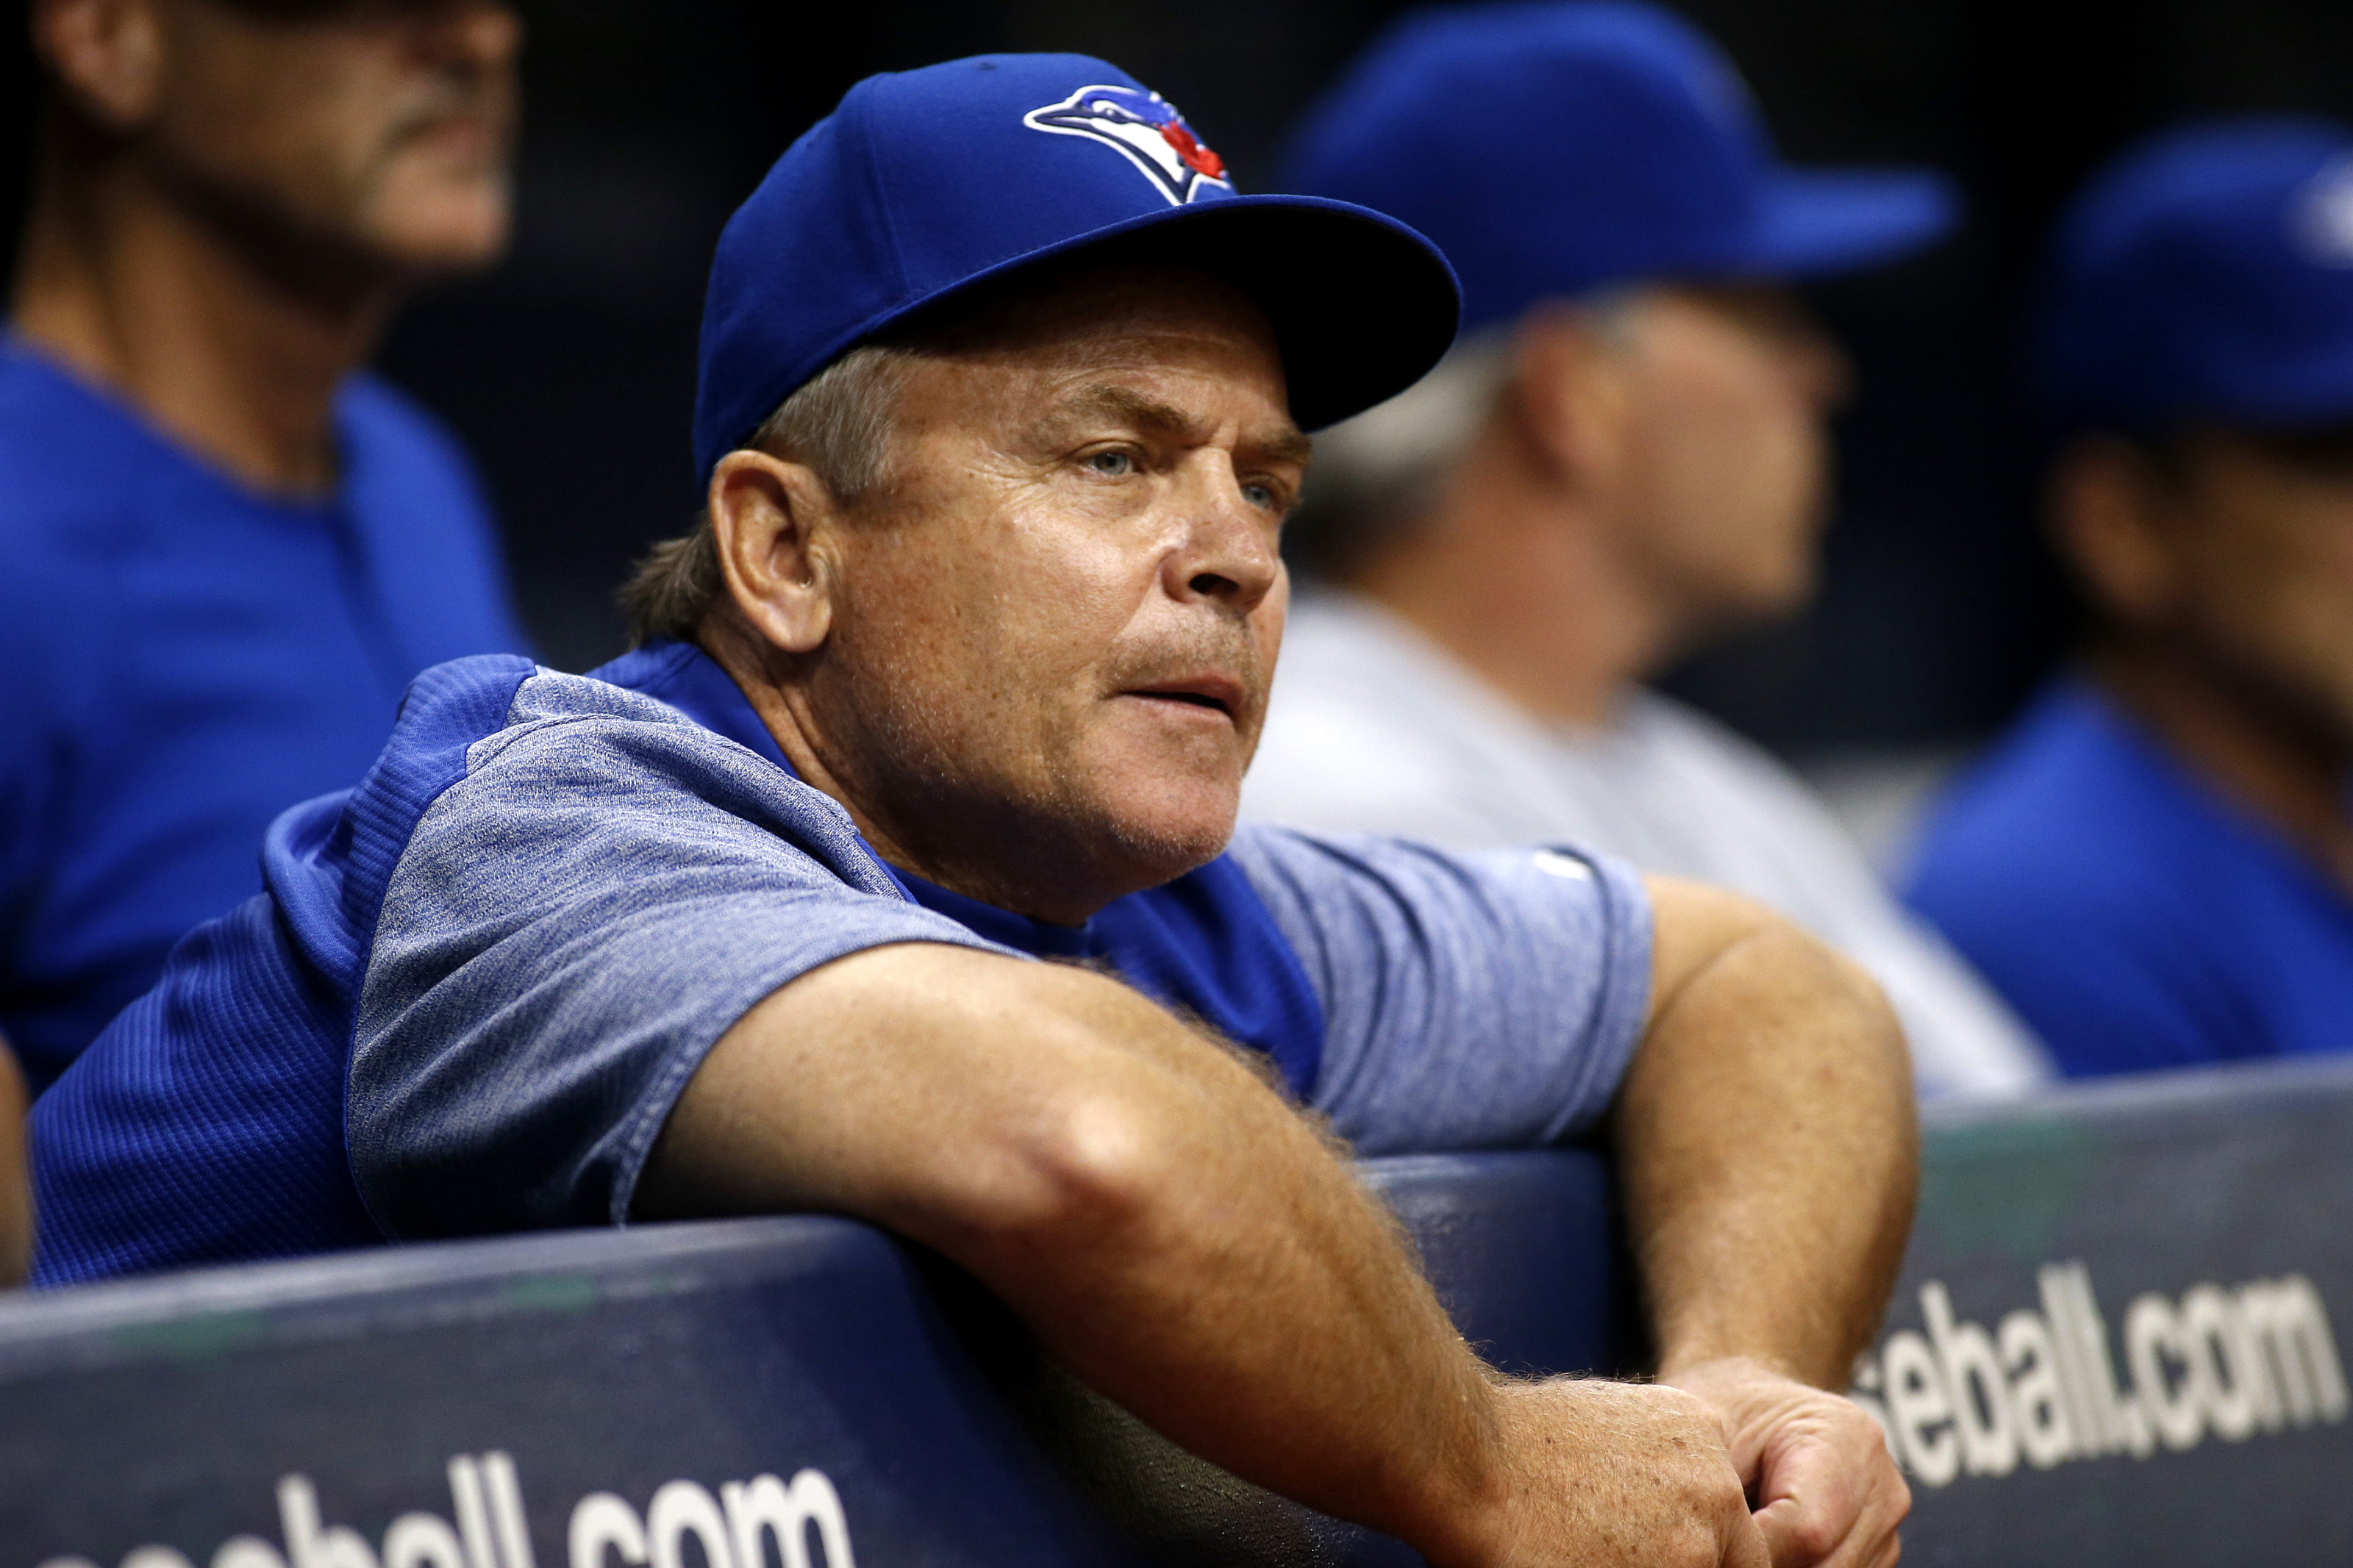 Toronto Blue Jays: John Gibbons will see out season as manager